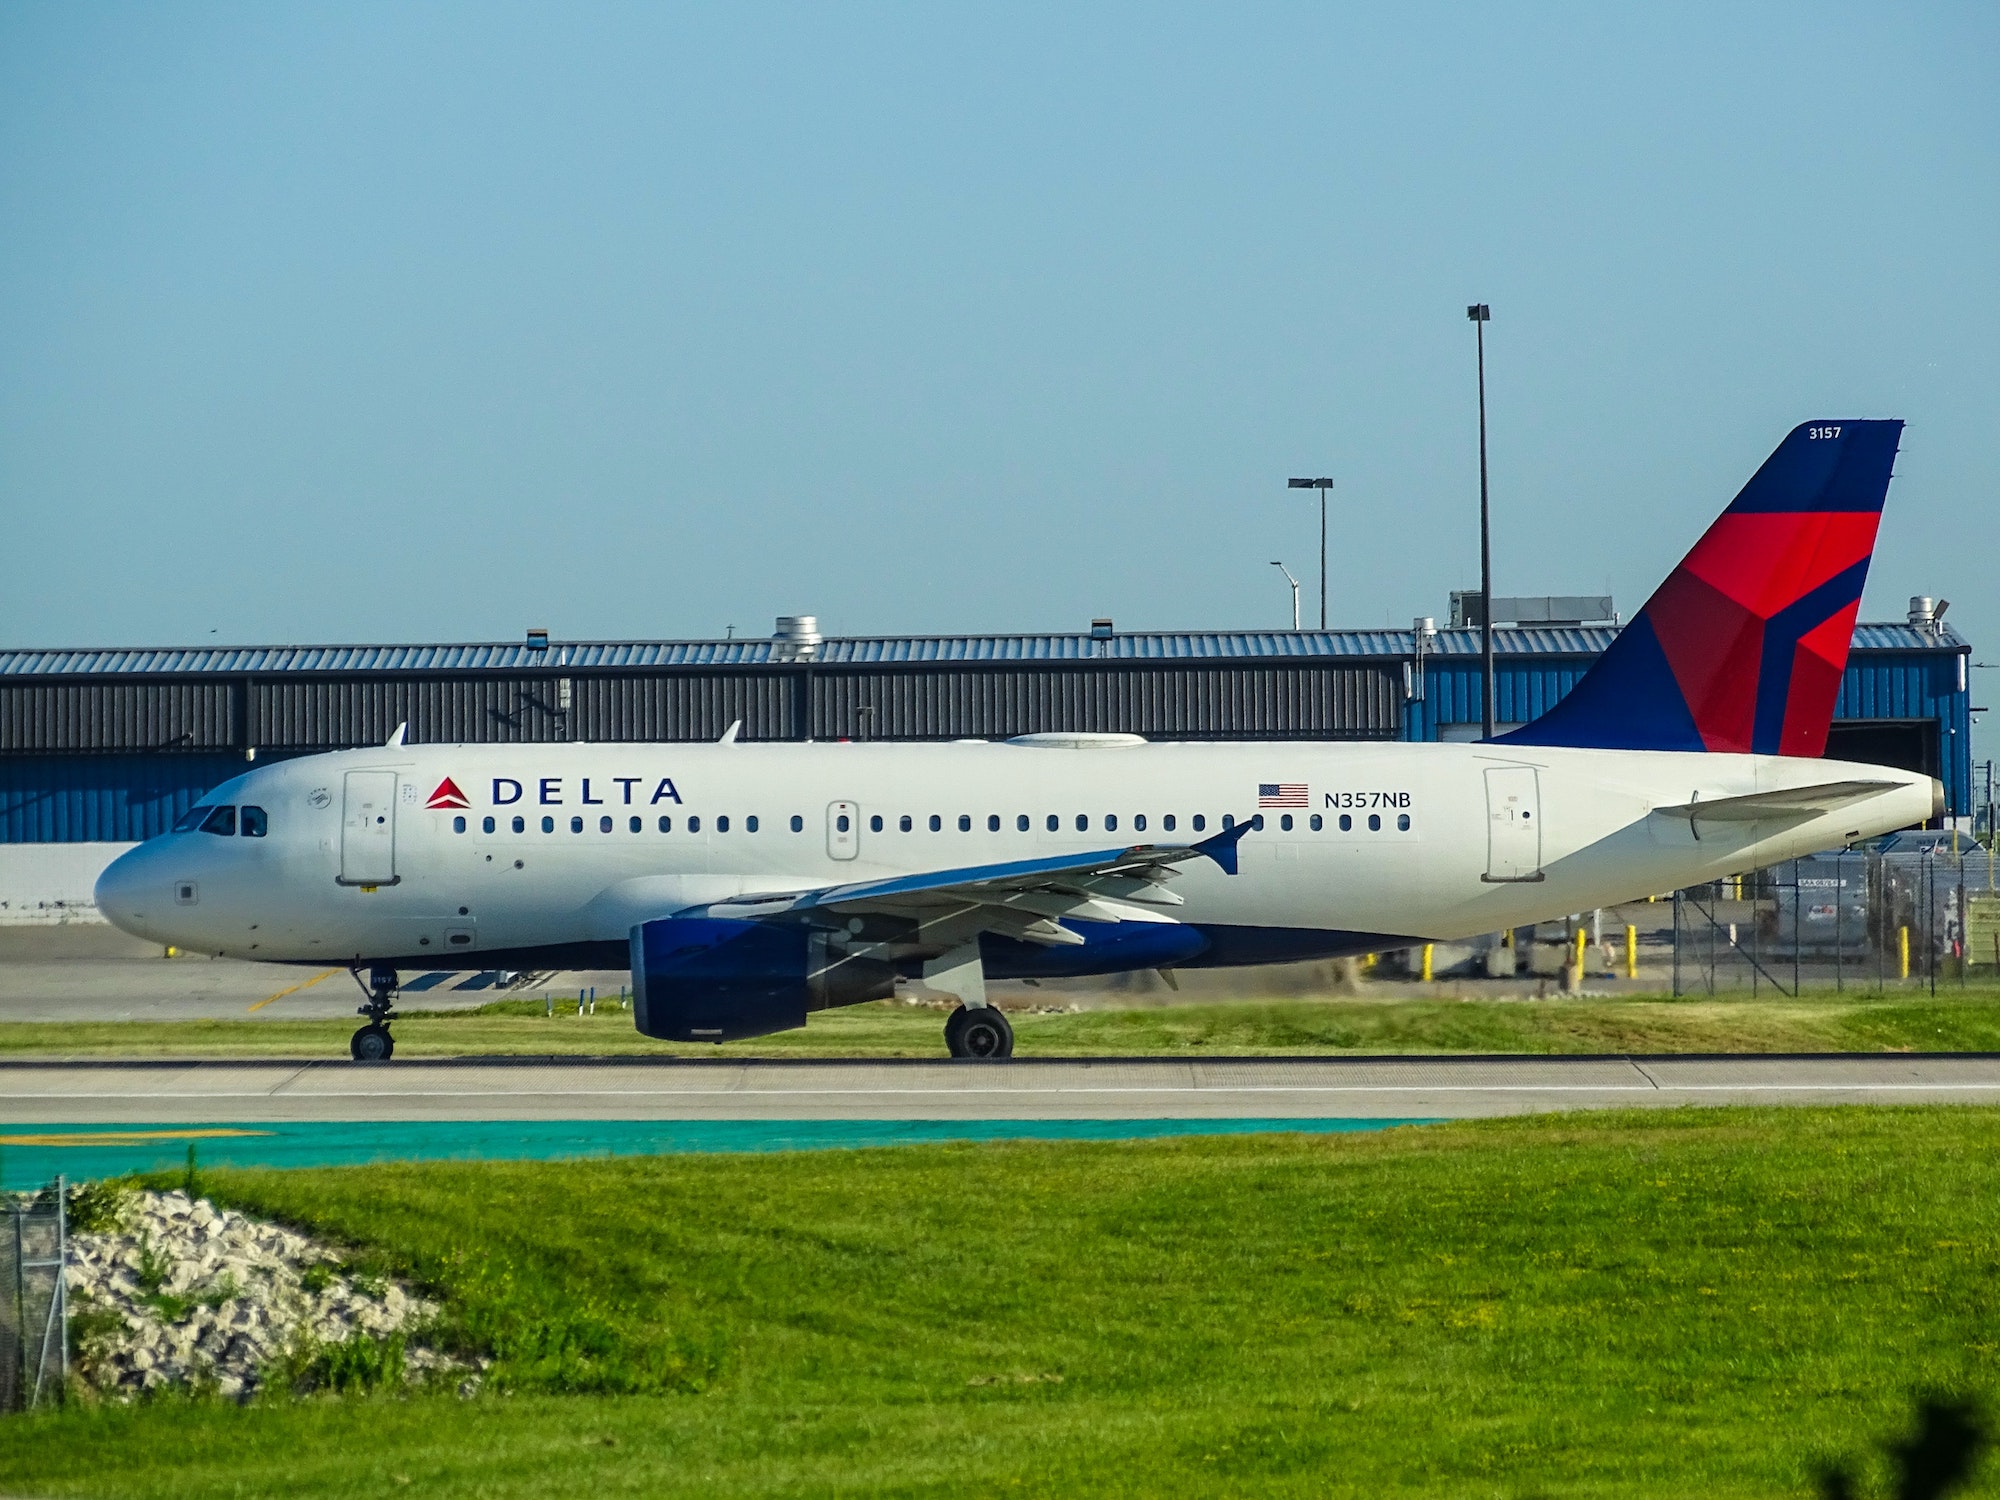 delta trip packages